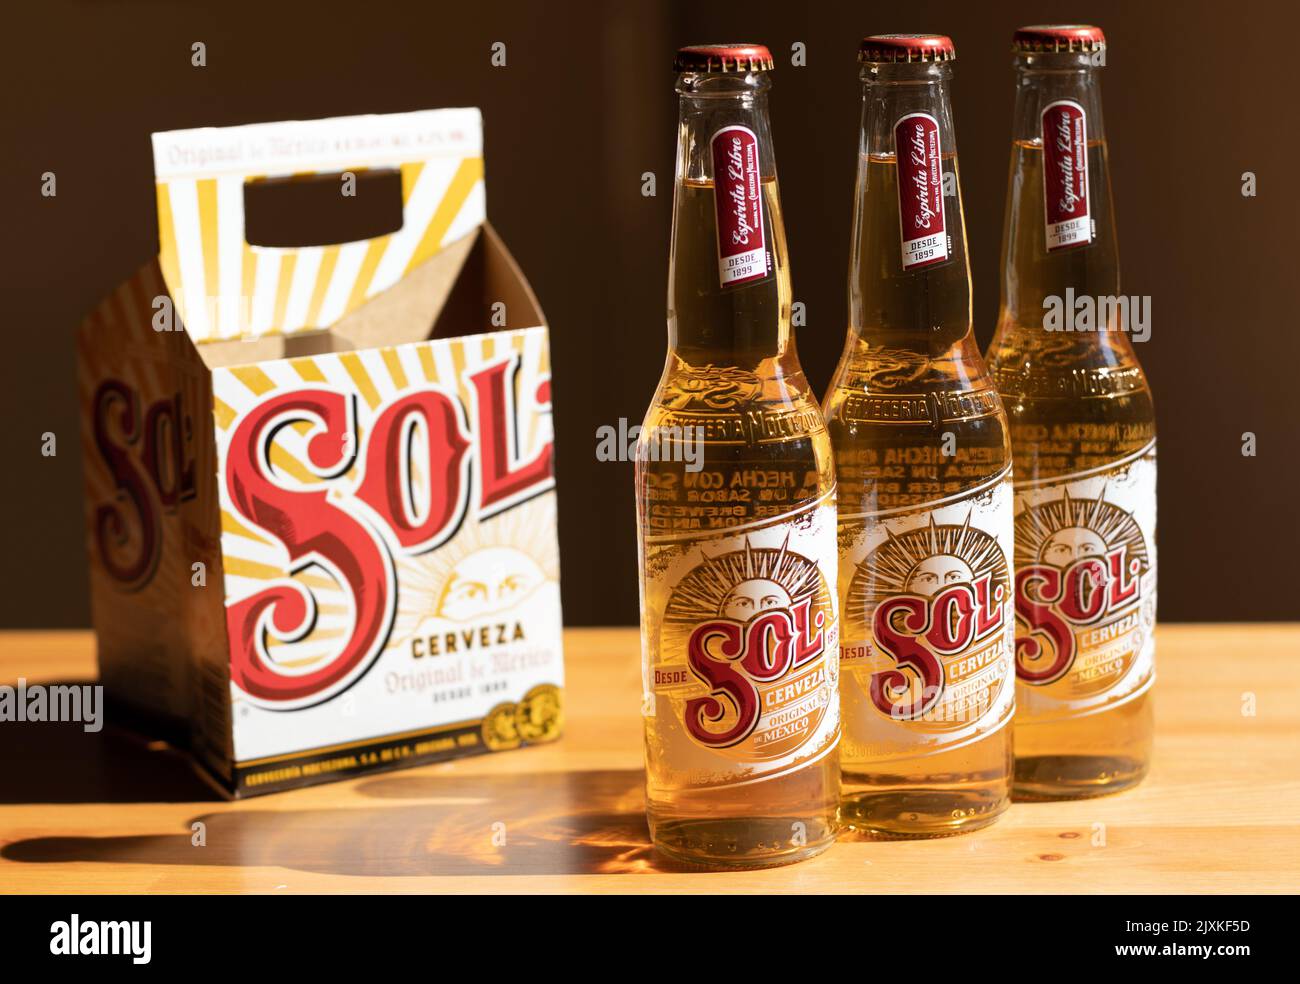 London UK - 24th August 2019 - Sol beer bottles and box on a table Stock Photo